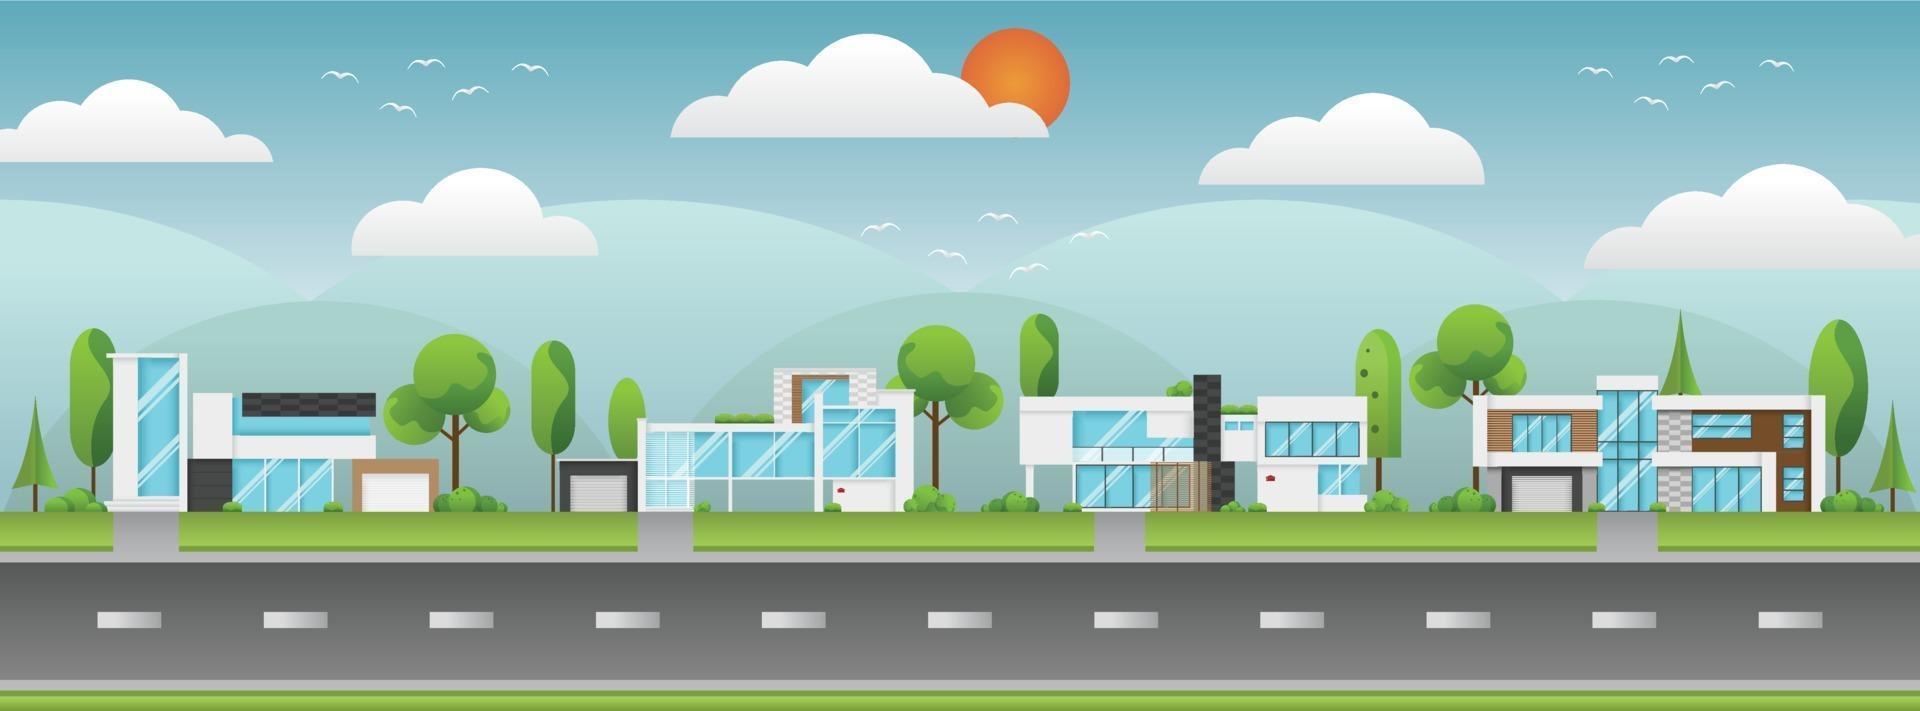 Flat design of houses or modern building with environment. vector